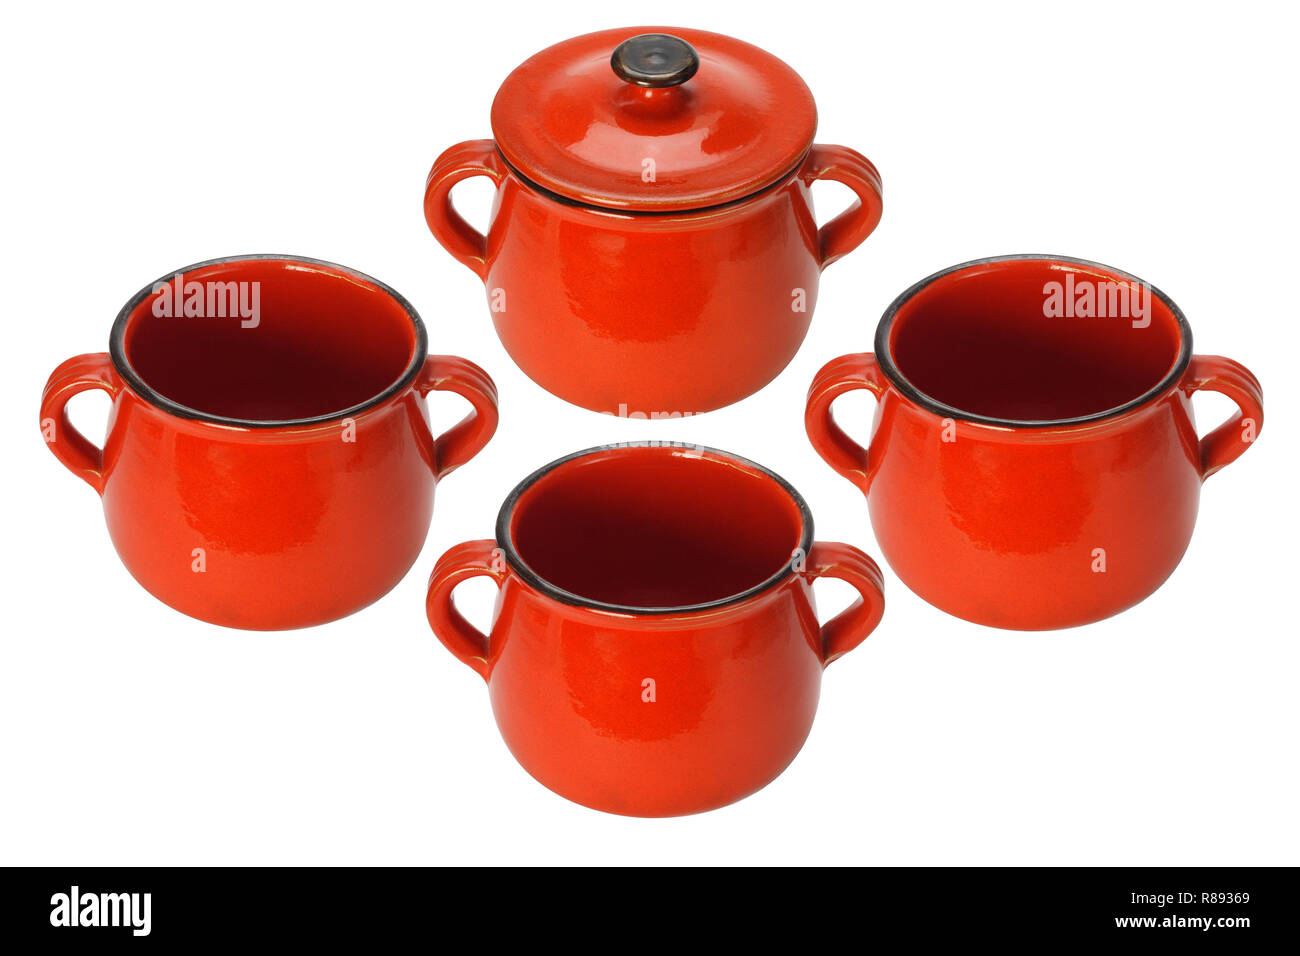 Red Clay Pots arranged on White Background Stock Photo